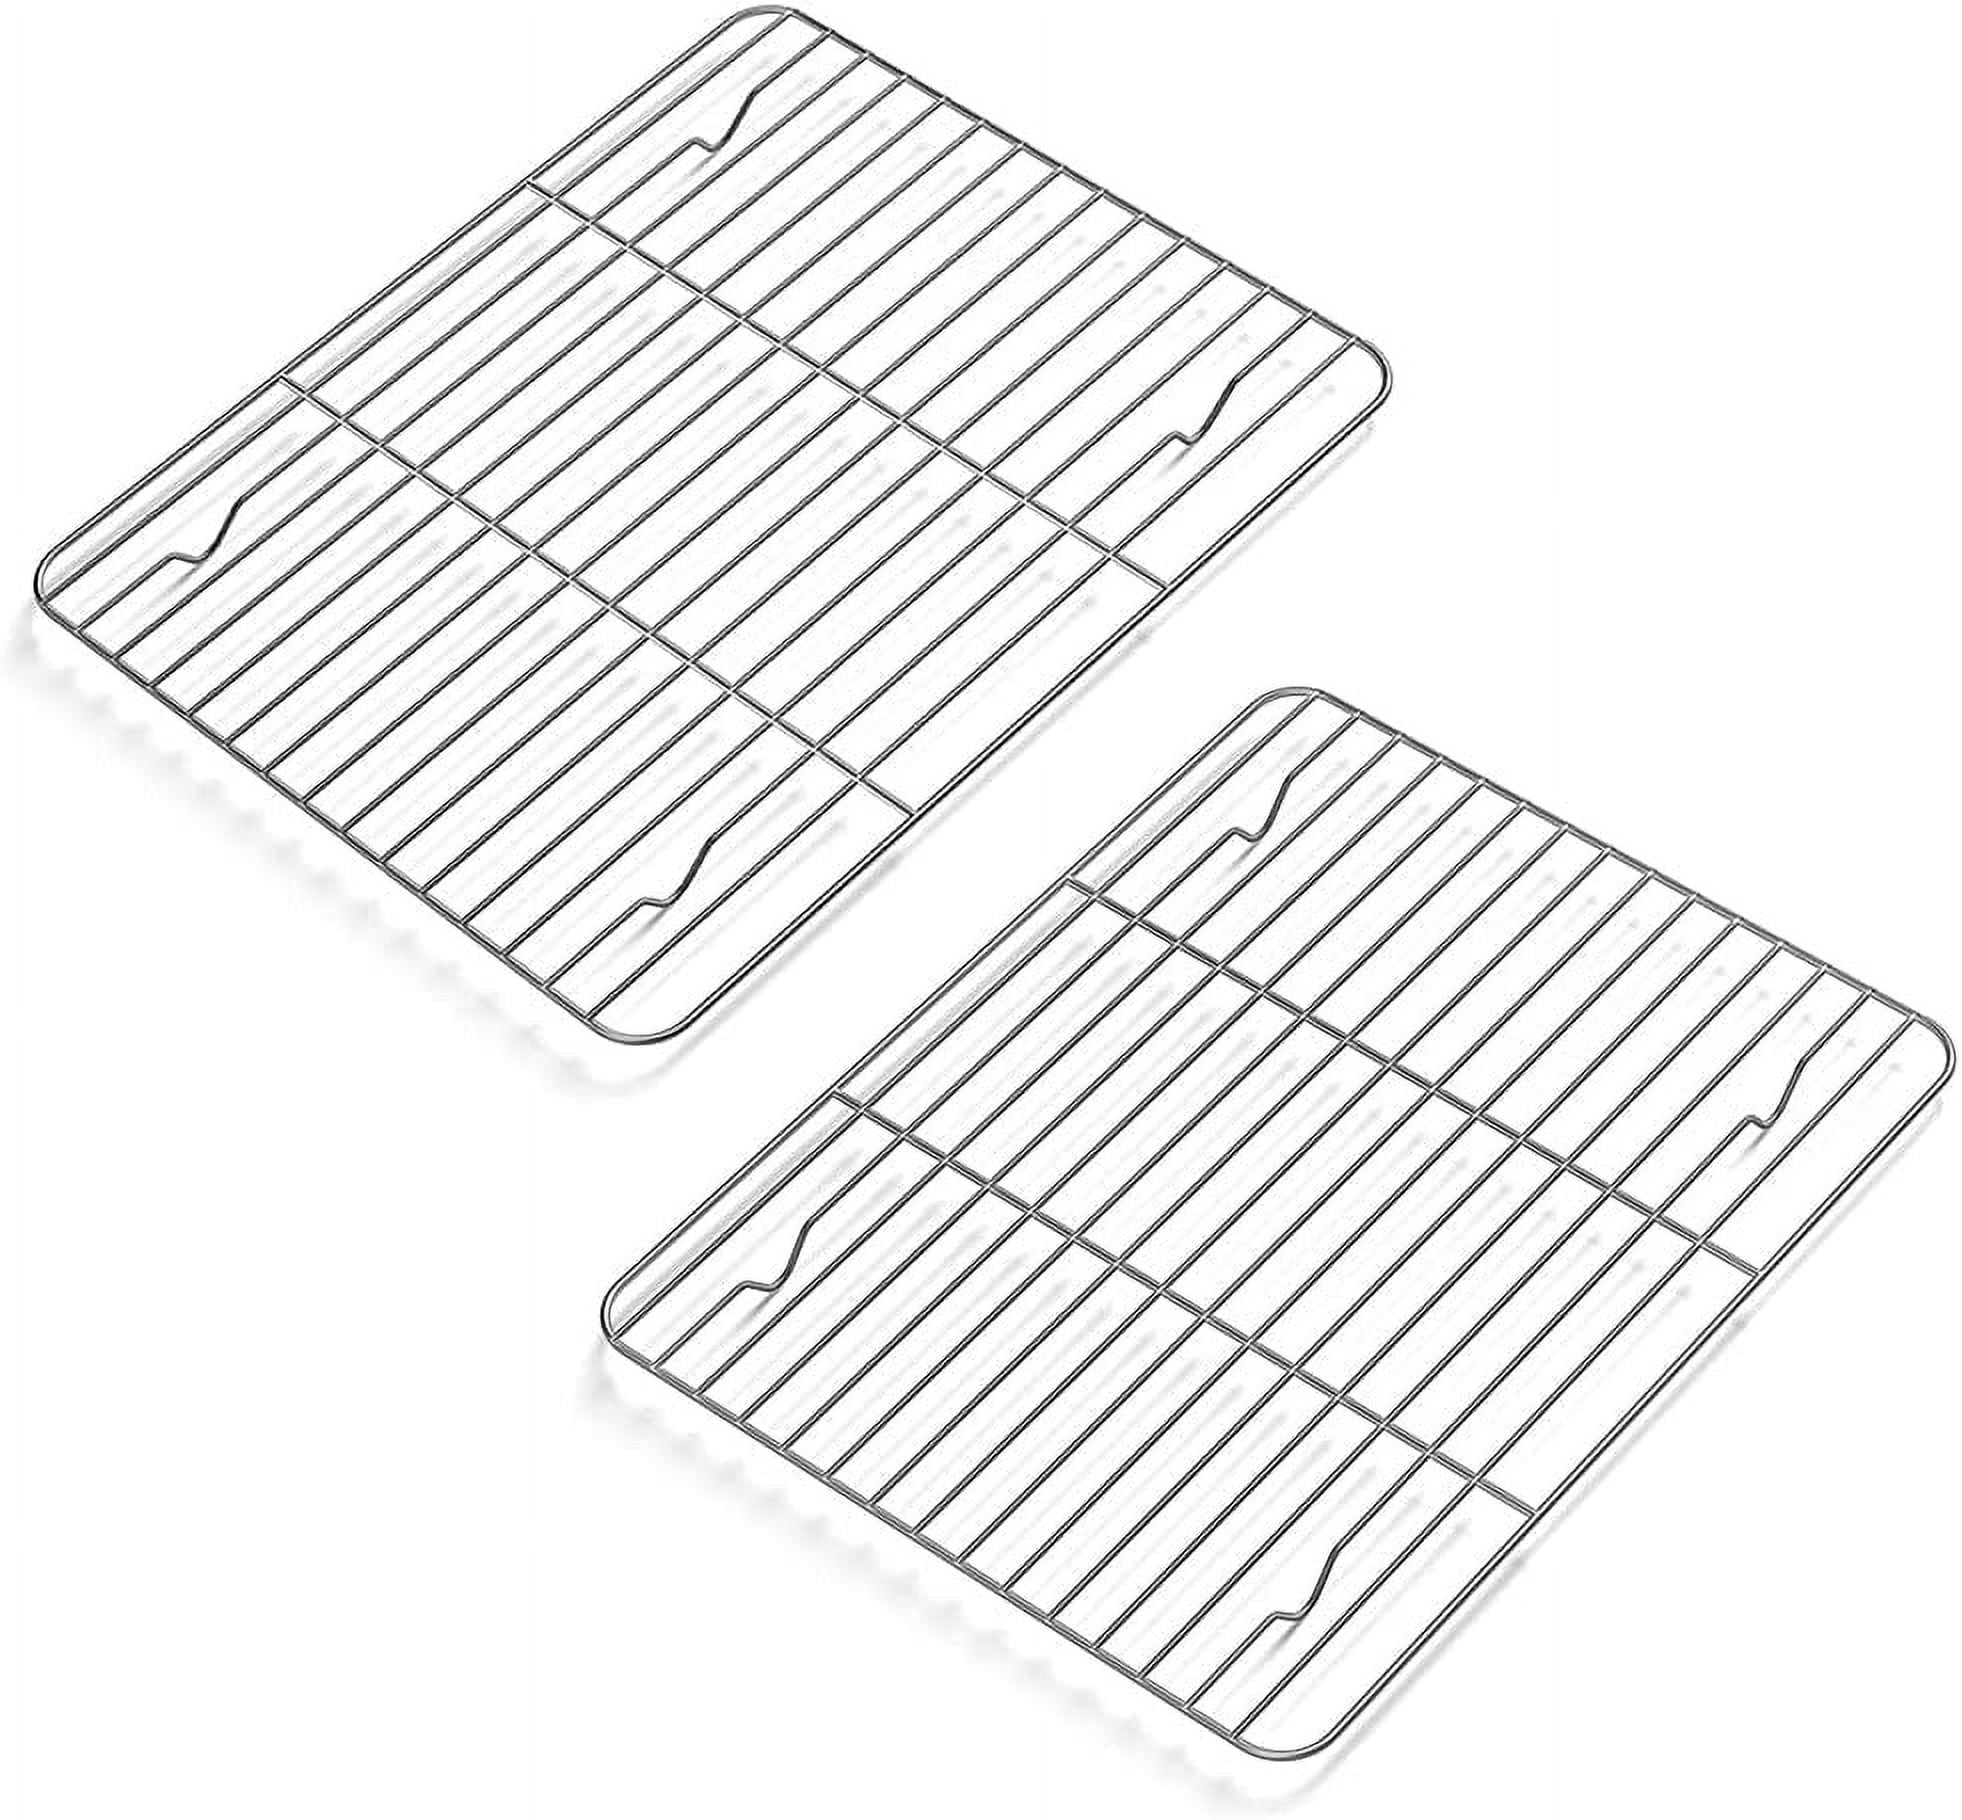 KITCHENATICS Small Quarter Sheet Cooling Rack for Cooking and Baking,  Oven-Safe Stainless Steel Wire Rack, Baking Rack for Oven Cooking, Heavy  Duty